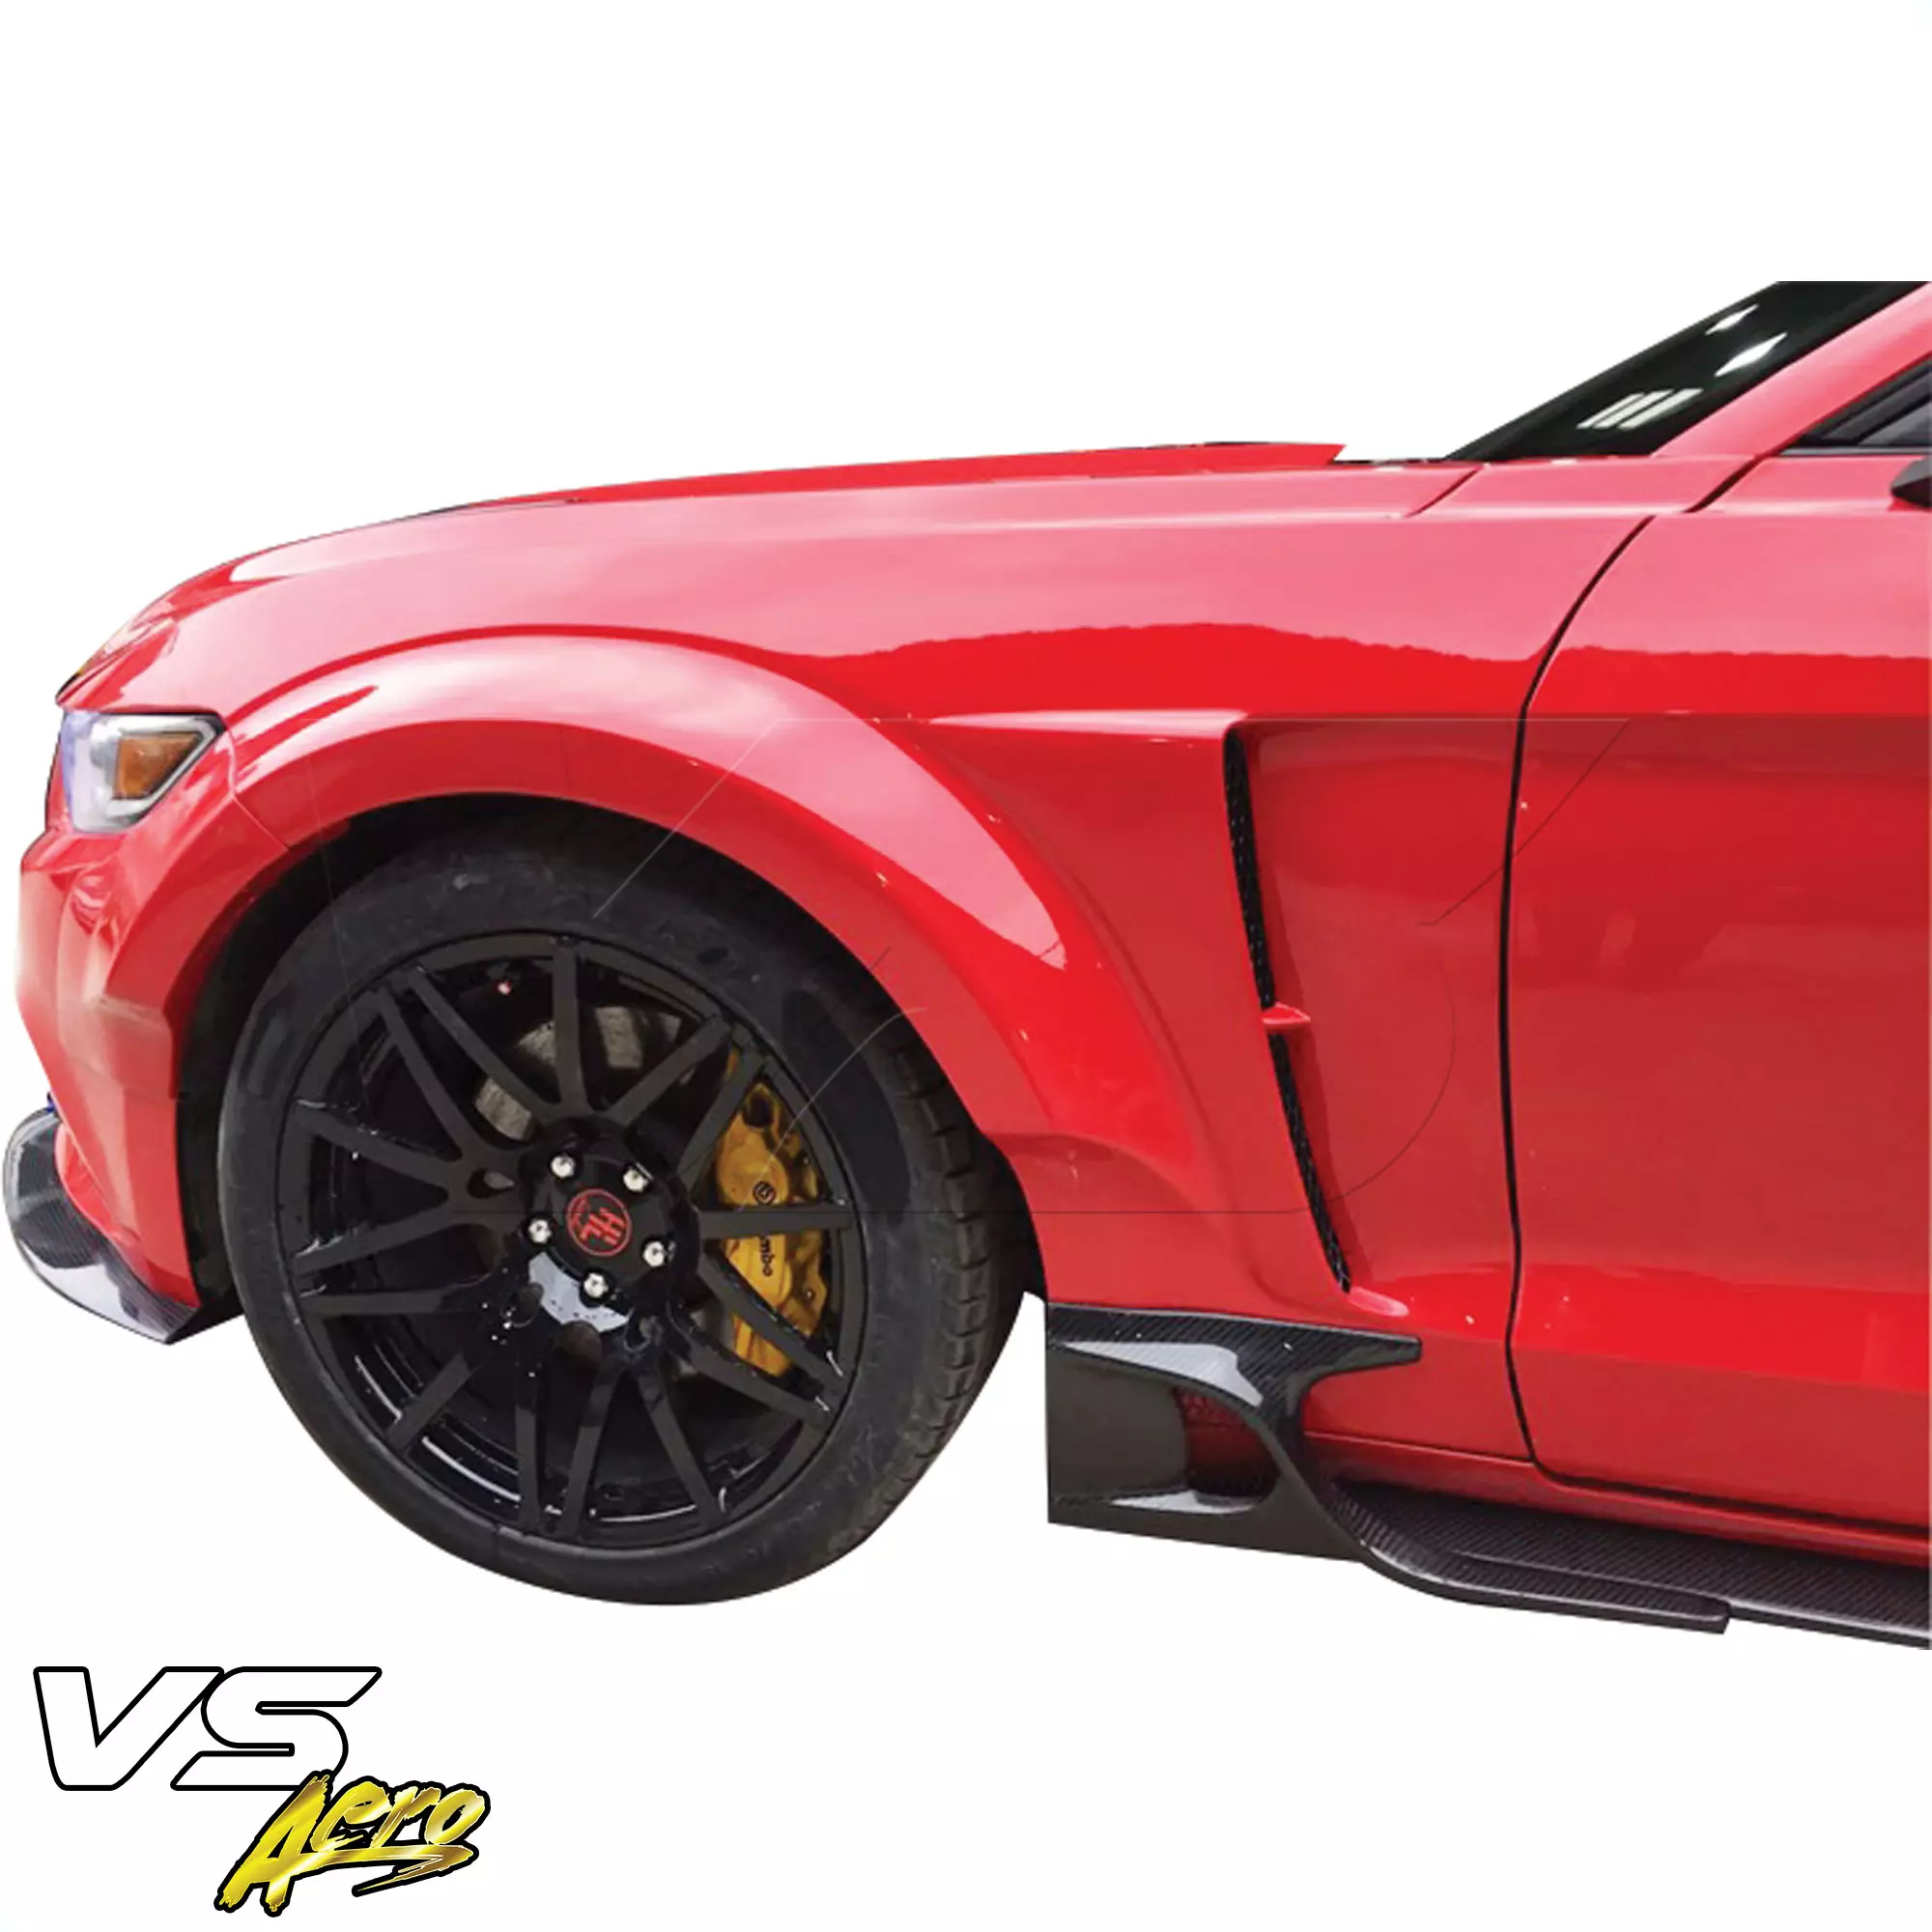 VSaero FRP KTOT Wide Body Fenders (front) > Ford Mustang 2015-2020 - Image 16